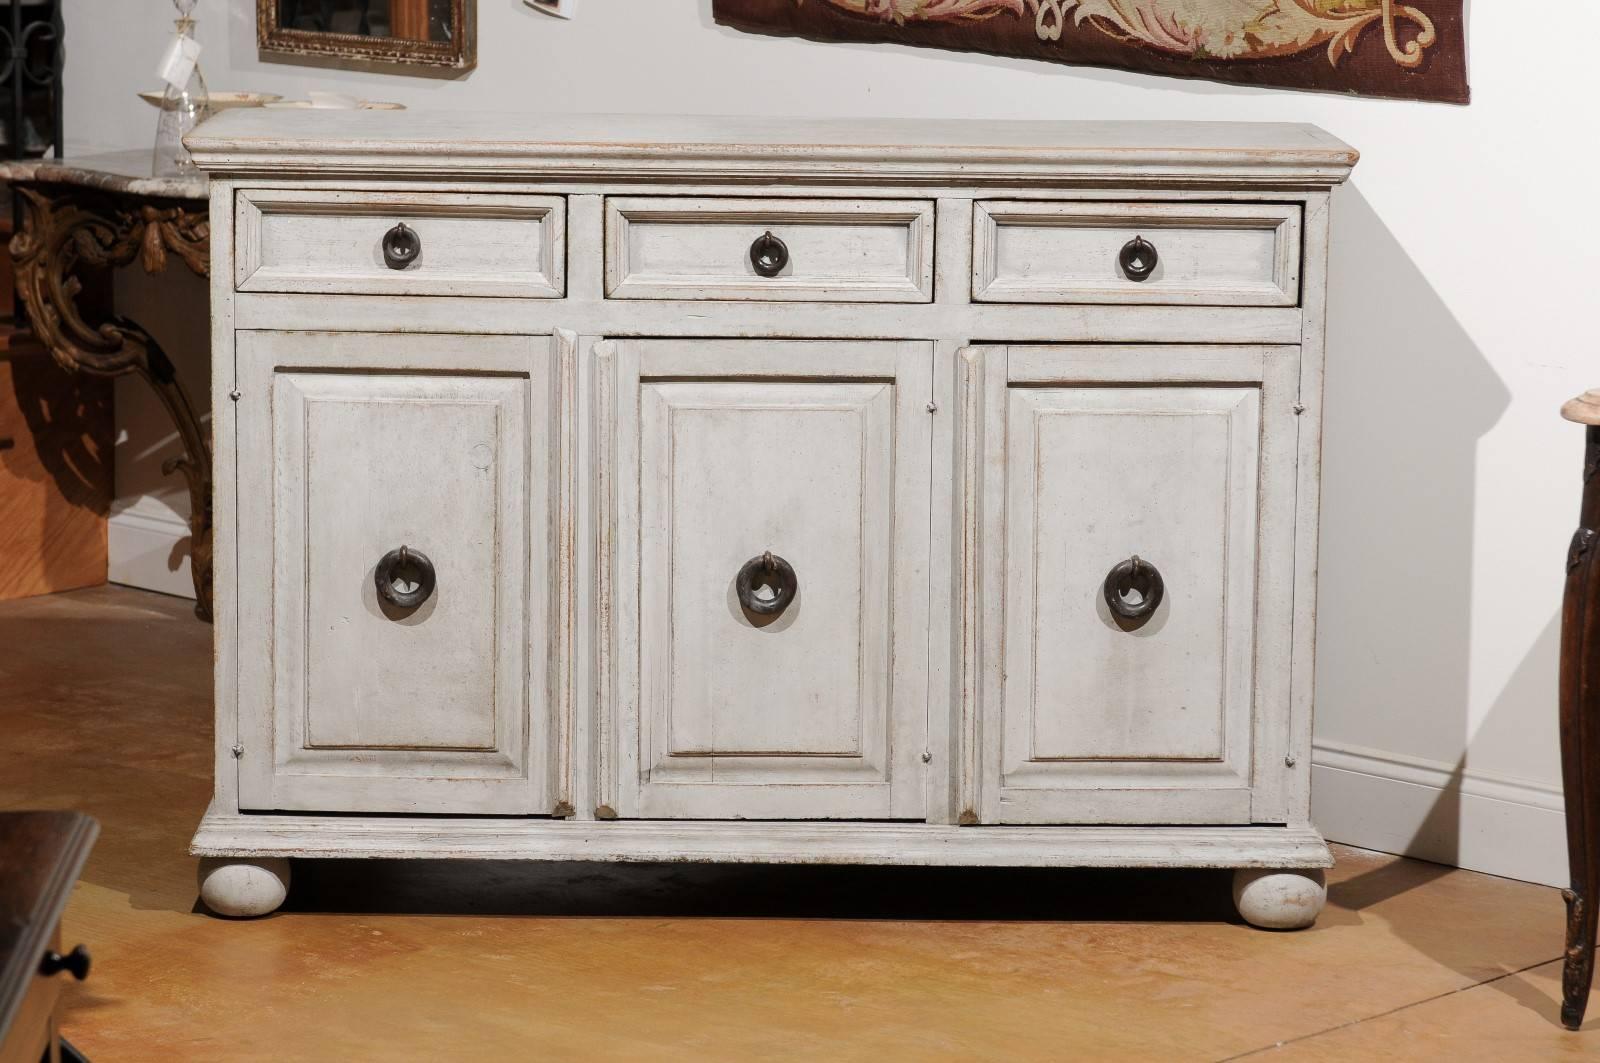 A Swedish painted wood enfilade with three drawers over three doors from the late 19th century. This Swedish long buffet features a rectangular molded top surmounting three drawers with recessed panels and circular ring pulls. Three doors located